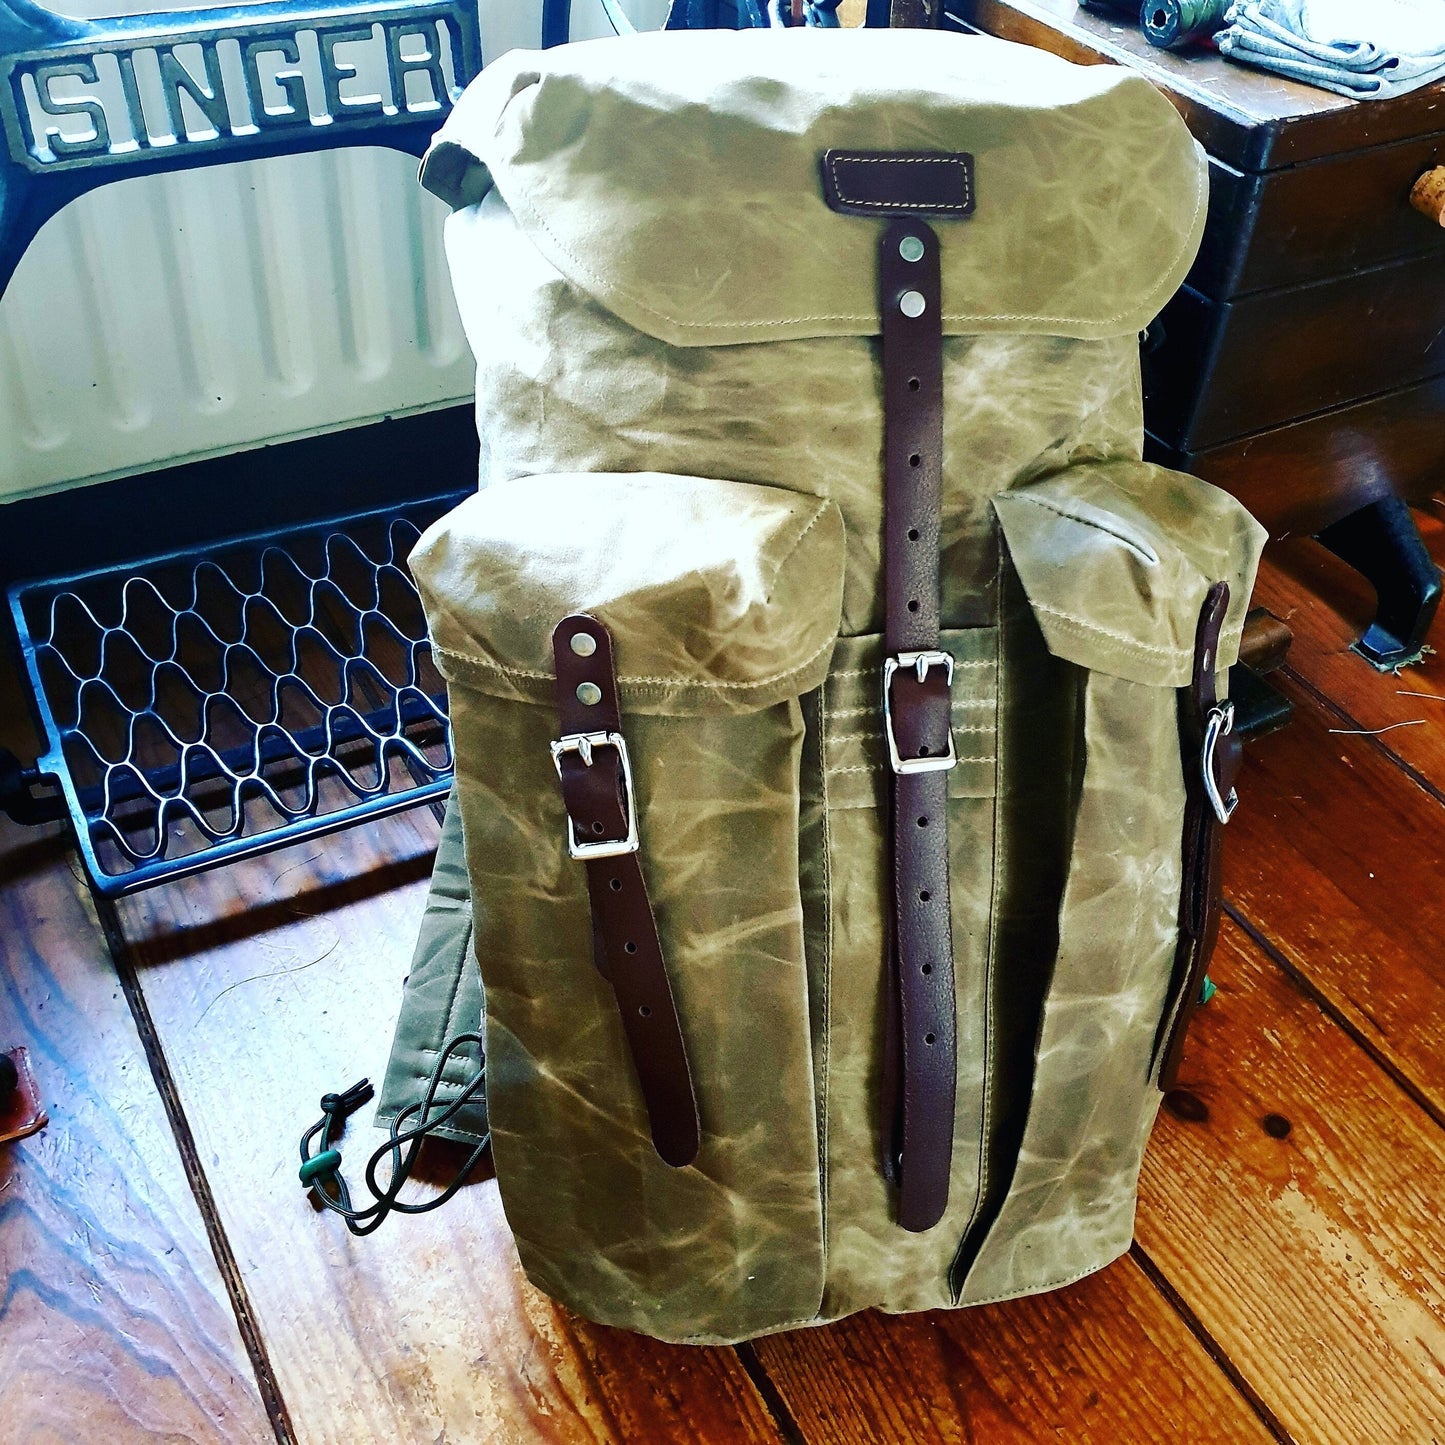 Waxed canvas backpack, The Bushcrafter 30L pack, hiking bag